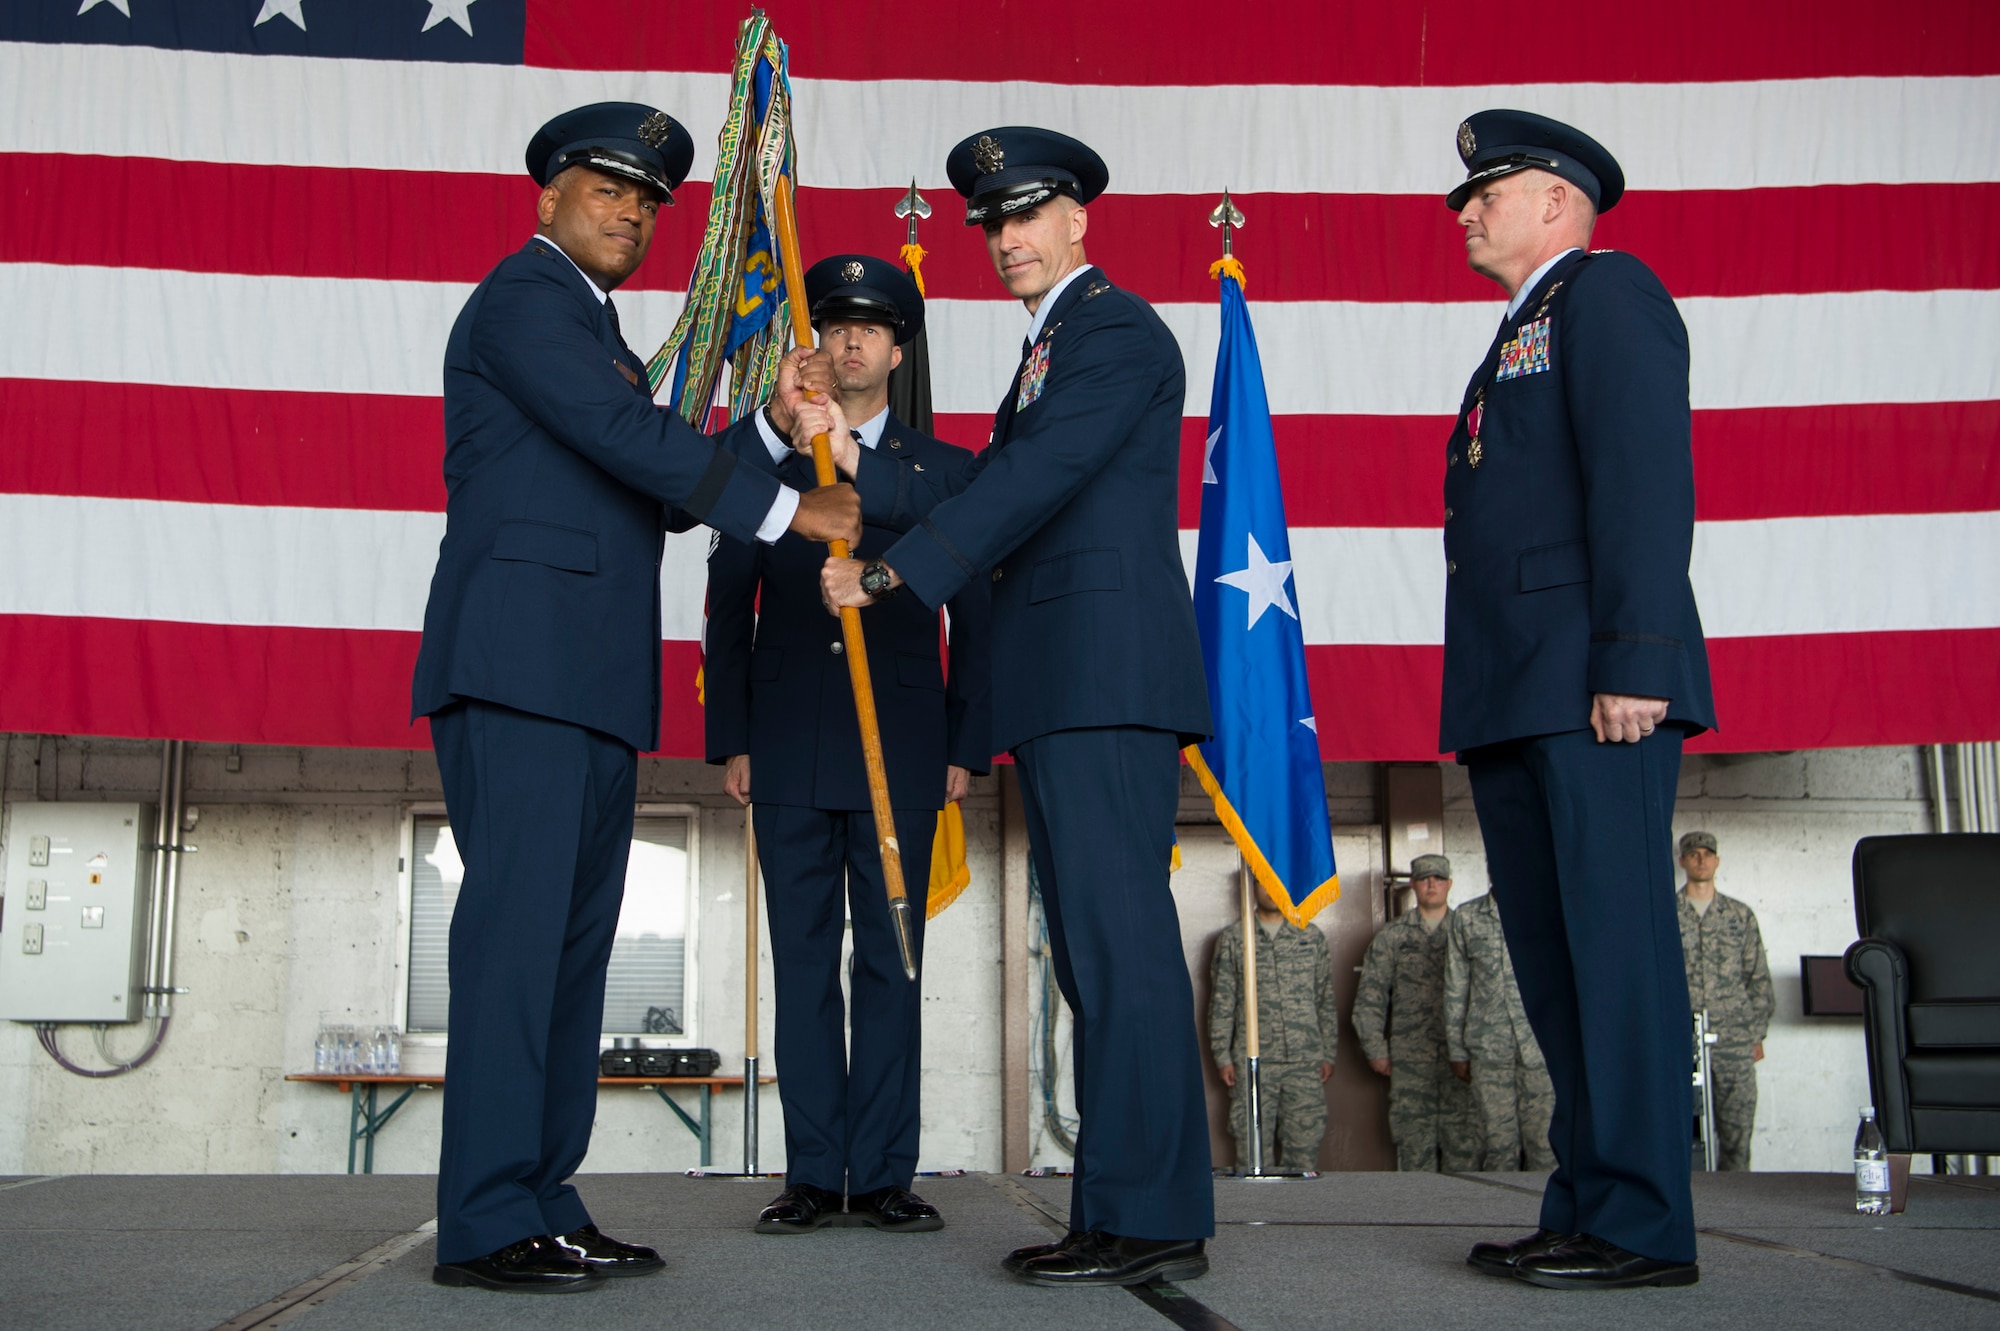 U.S. Air Force Lt. Gen. Richard Clark, 3rd Air Force commander, passes the 52nd Fighter Wing guidon to Col. Jason Bailey, incoming 52nd Fighter Wing commander, during the wing change of command ceremony in Hangar 1 at Spangdahlem Air Base, Germany, Aug. 29, 2017. During the ceremony Col. Joseph McFall relinquished command of the 52nd FW after two and half years as the commander of five groups, 24 squadrons, 11 geographically separated units spread across five countries with 5,000 dedicated military and civilian personnel. (U.S. Air Force photo by Senior Airman Dawn M. Weber)